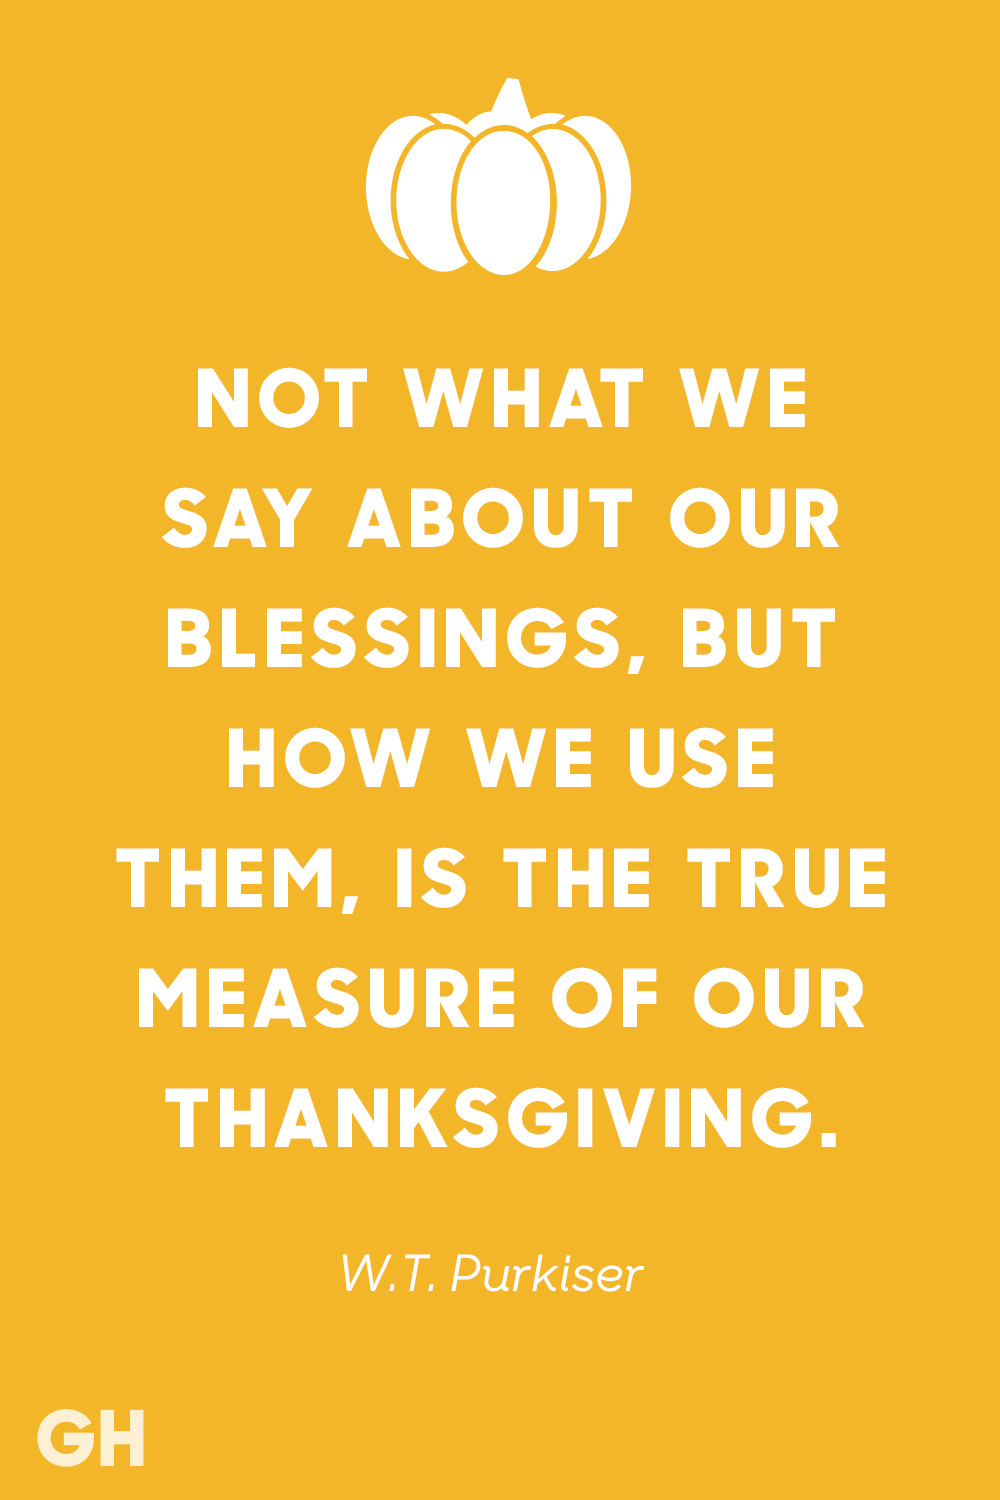 Thanksgiving Picture Quotes
 15 Best Thanksgiving Quotes Inspirational and Funny